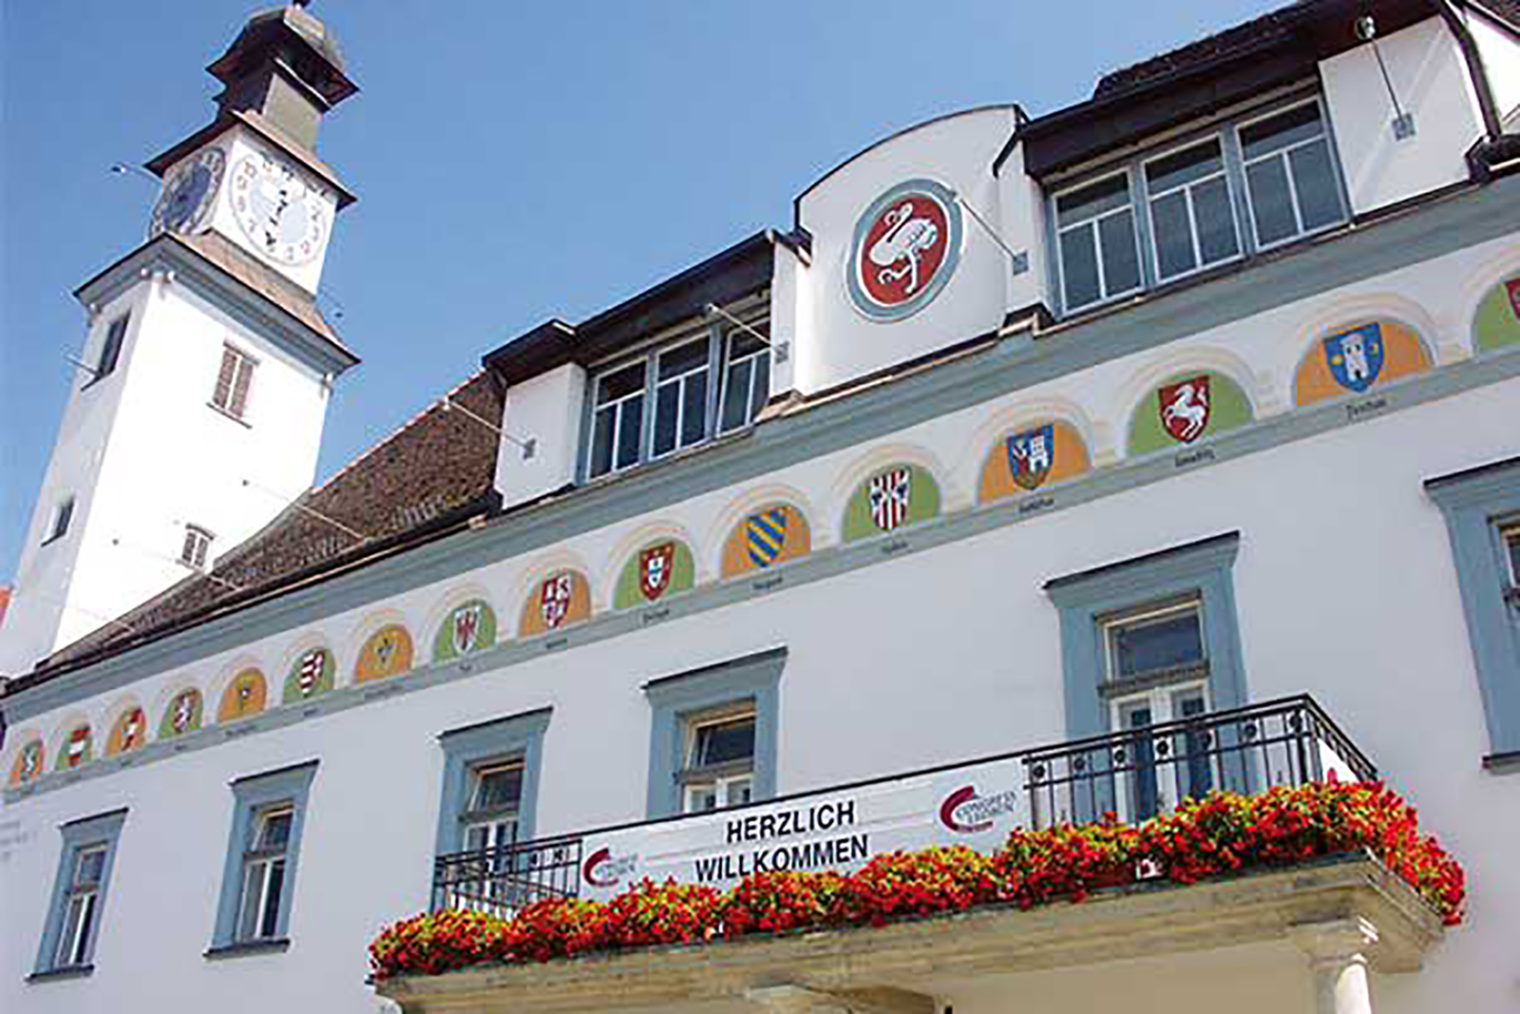 Old City Hall (Leoben Congress) with the coat of arms on its façade